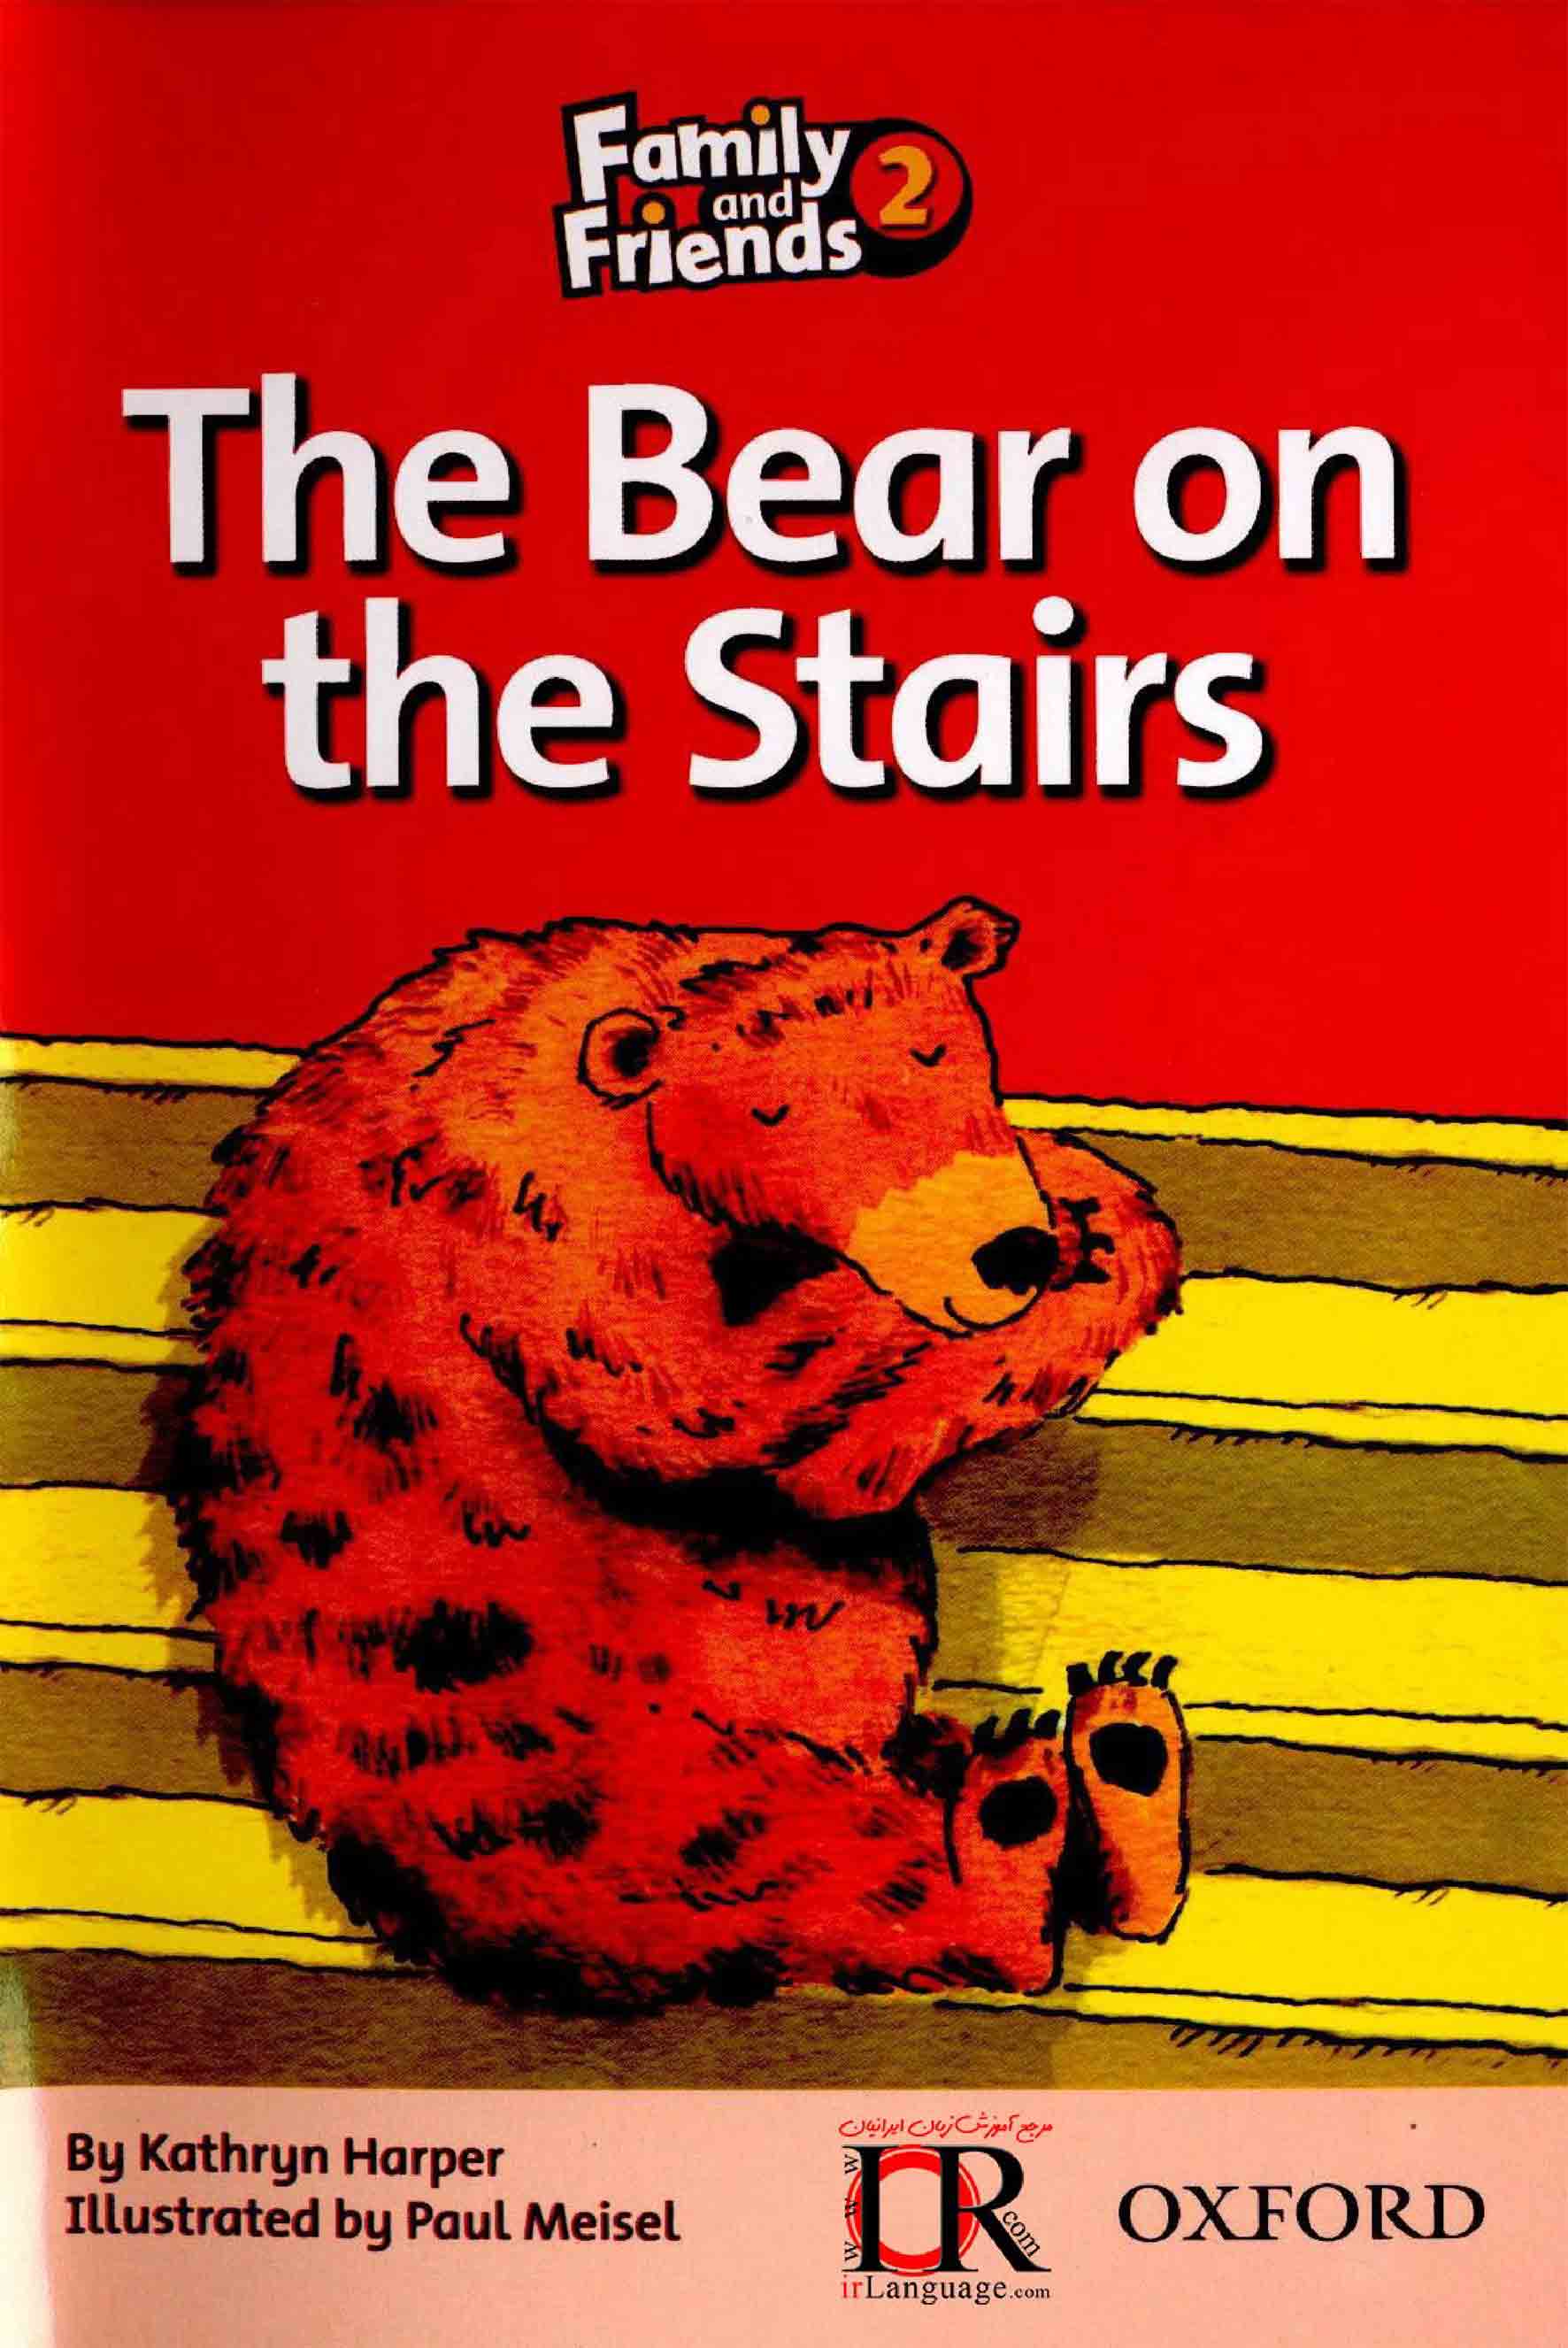 The Bear on The Stairs